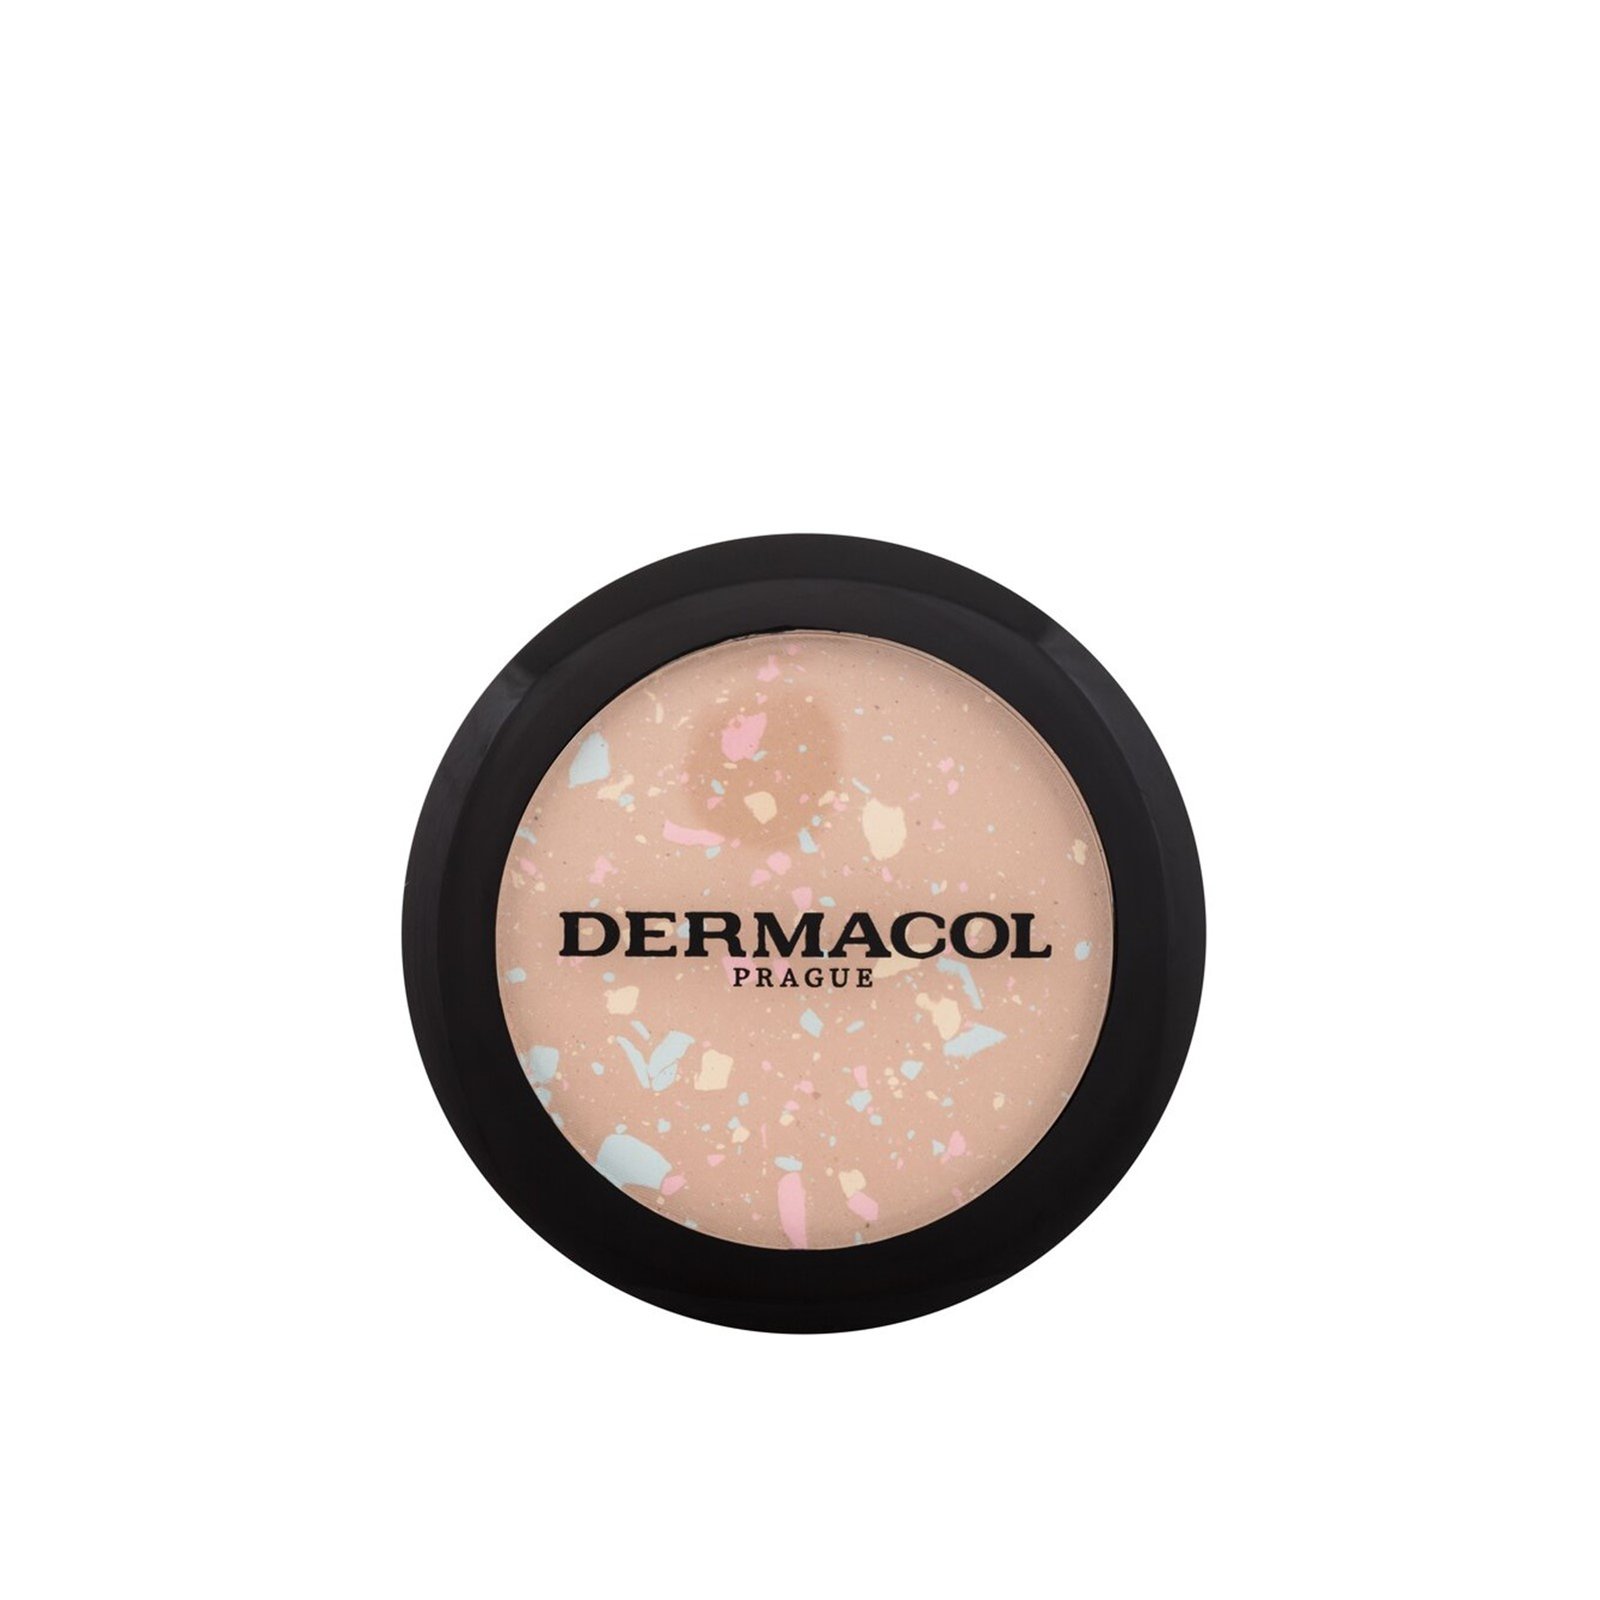 Dermacol Mineral Compact Powder 02 8.5g